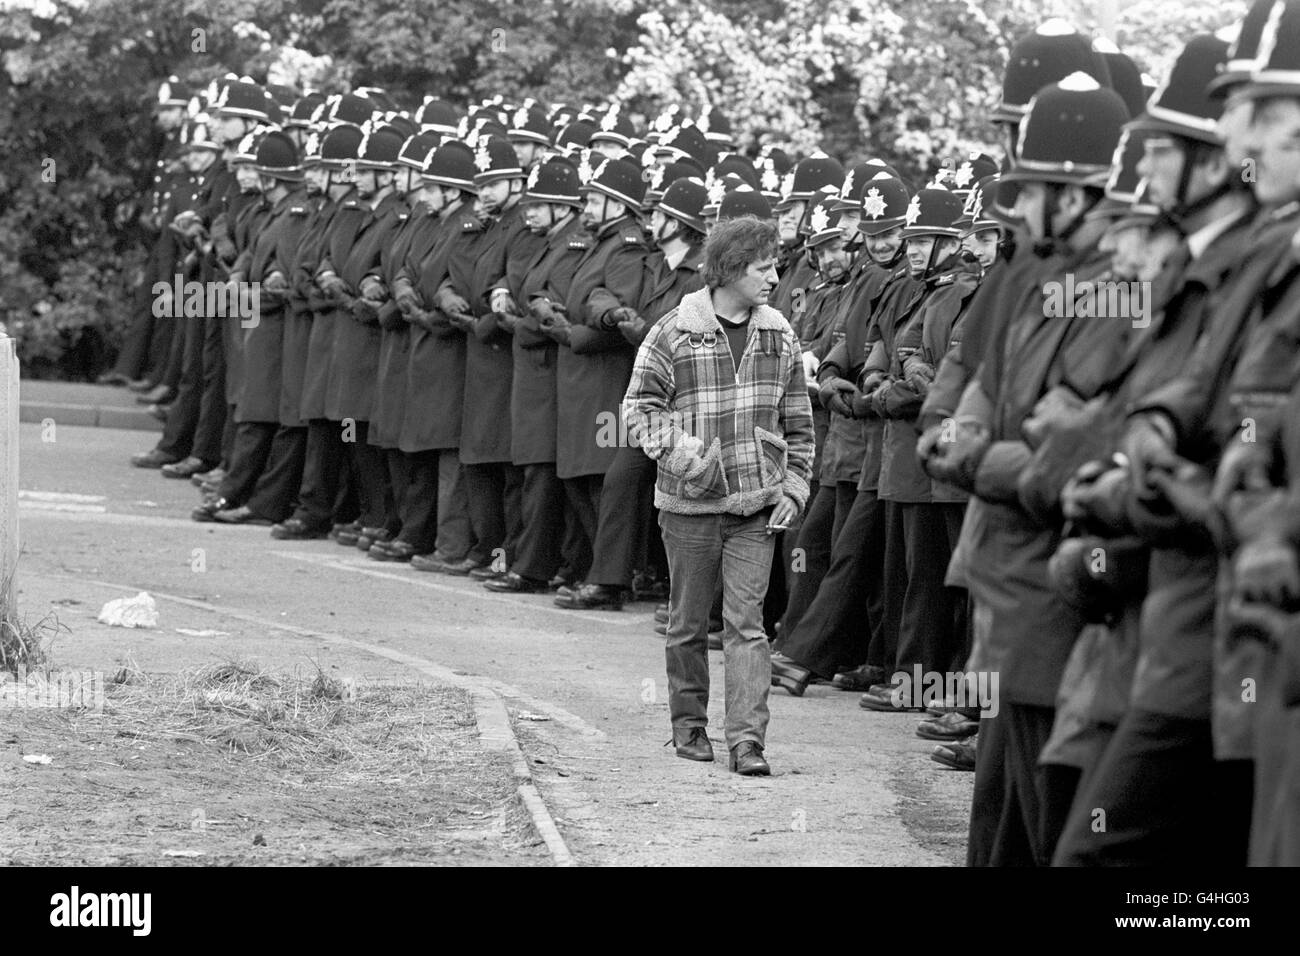 A CHEEKY PICKET CALMLY 'INSPECTS' A LINE OF LINKED POLICEMAN OUTSIDE THE ORGREAVE COKING PLANT NEAR ROTHERHAM DURING THE MINERS DISPUTE. Stock Photo